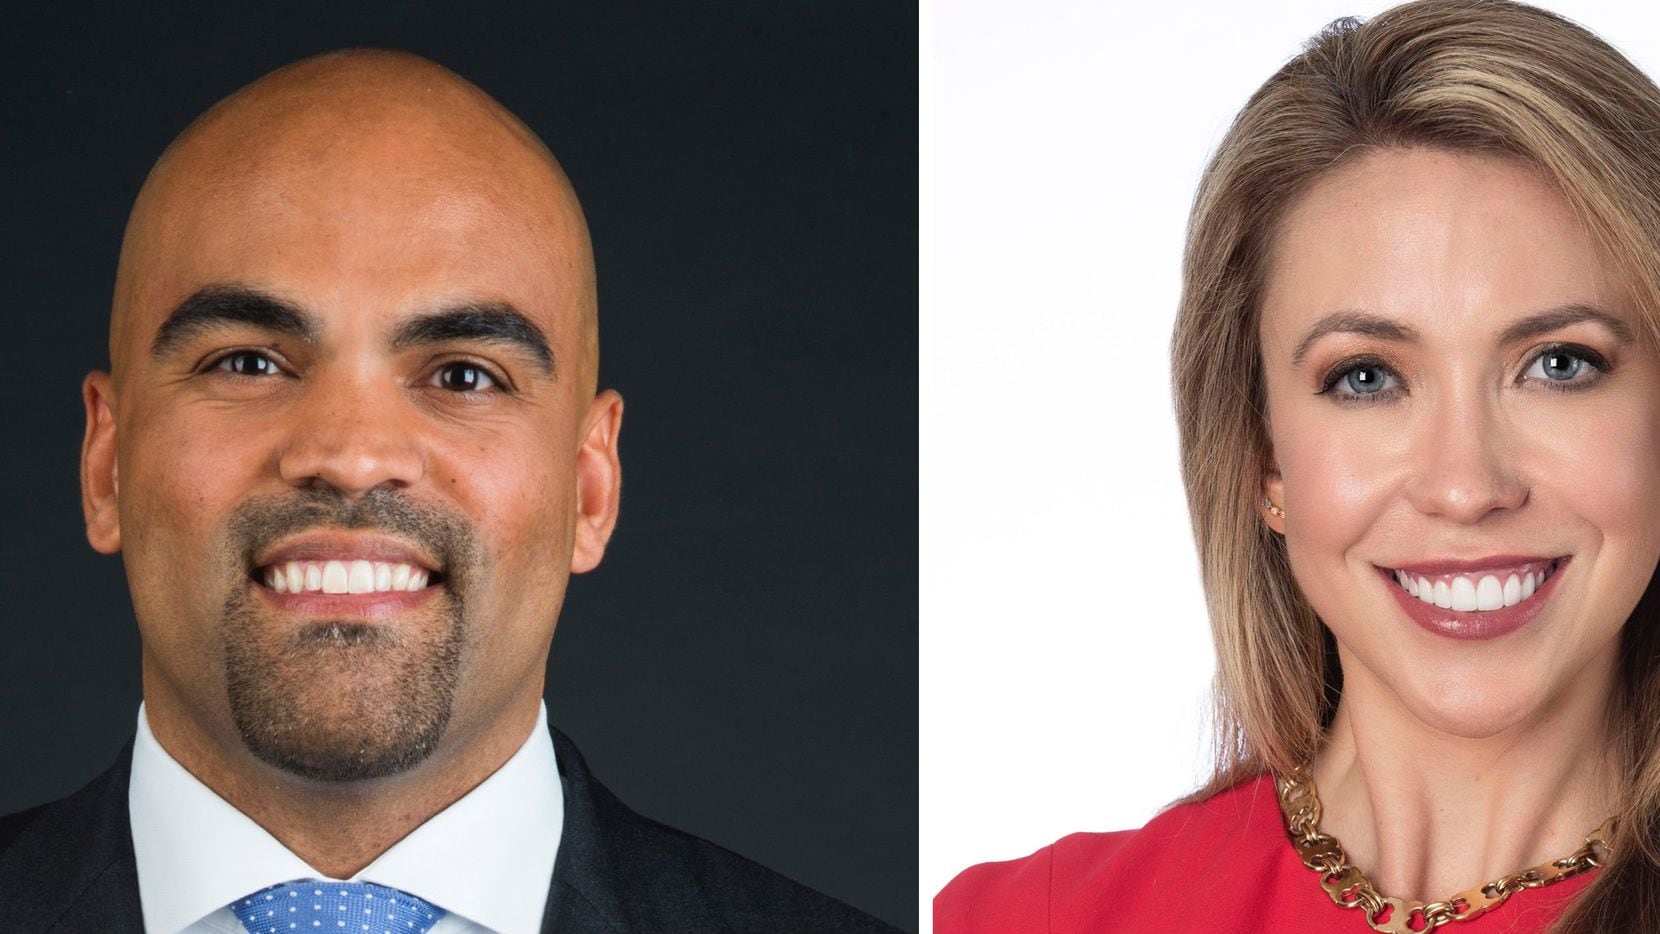 Rep. Colin Allred, left, D-Dallas, is defending the District 32 seat in Congress against Republican Genevieve Collins, right, of Dallas. Photo by Ashley Landis/The Dallas Morning News) and Glen Ellman